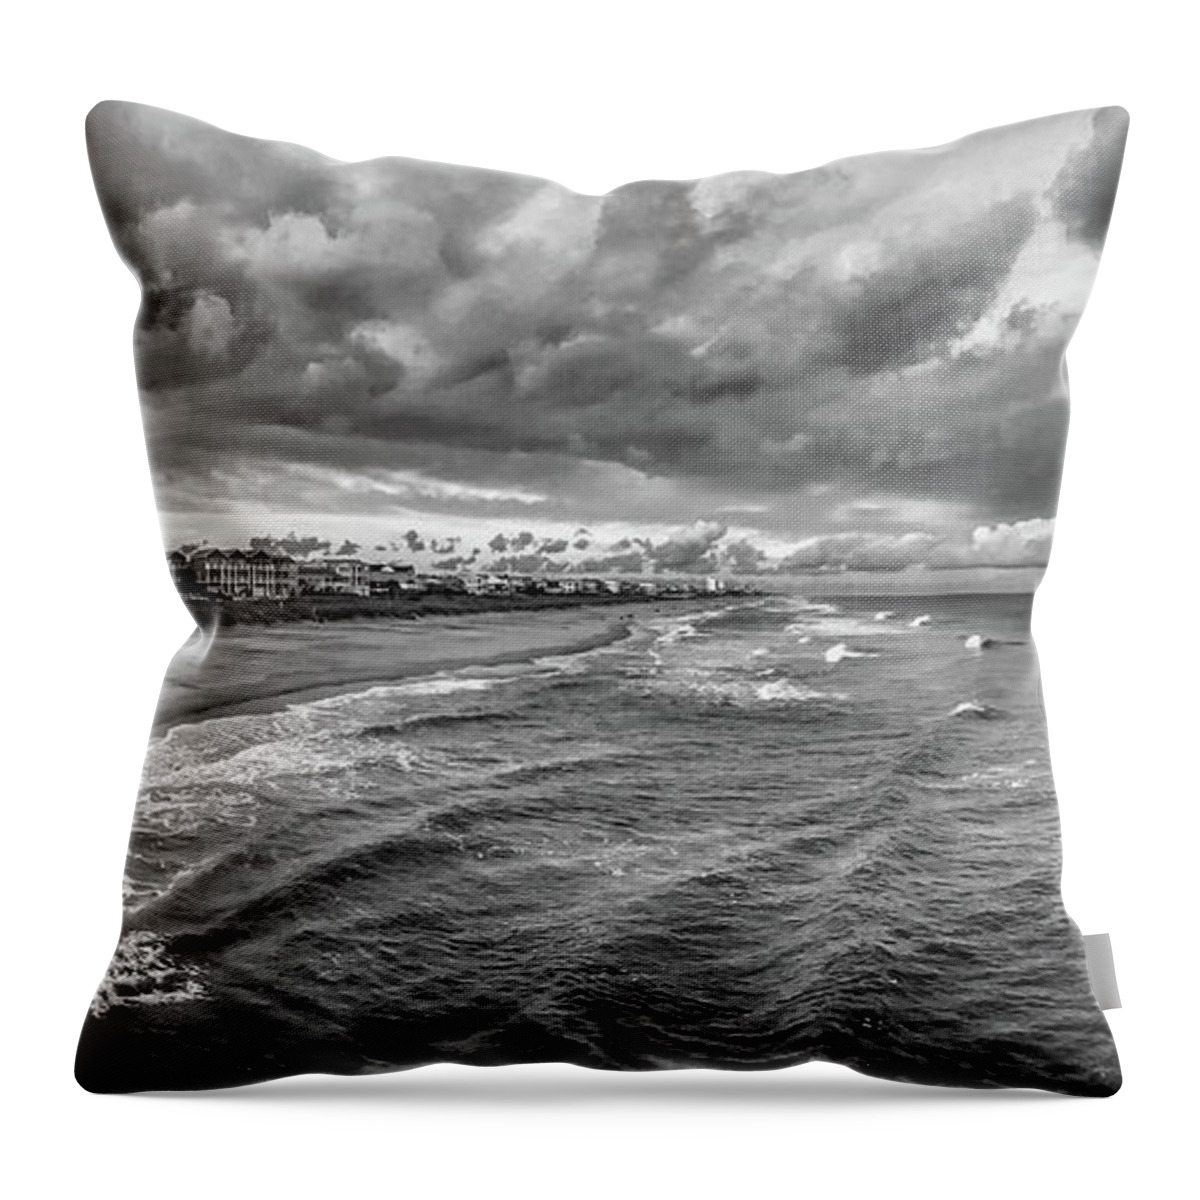  Throw Pillow featuring the photograph Stormy Morning by Phil Mancuso